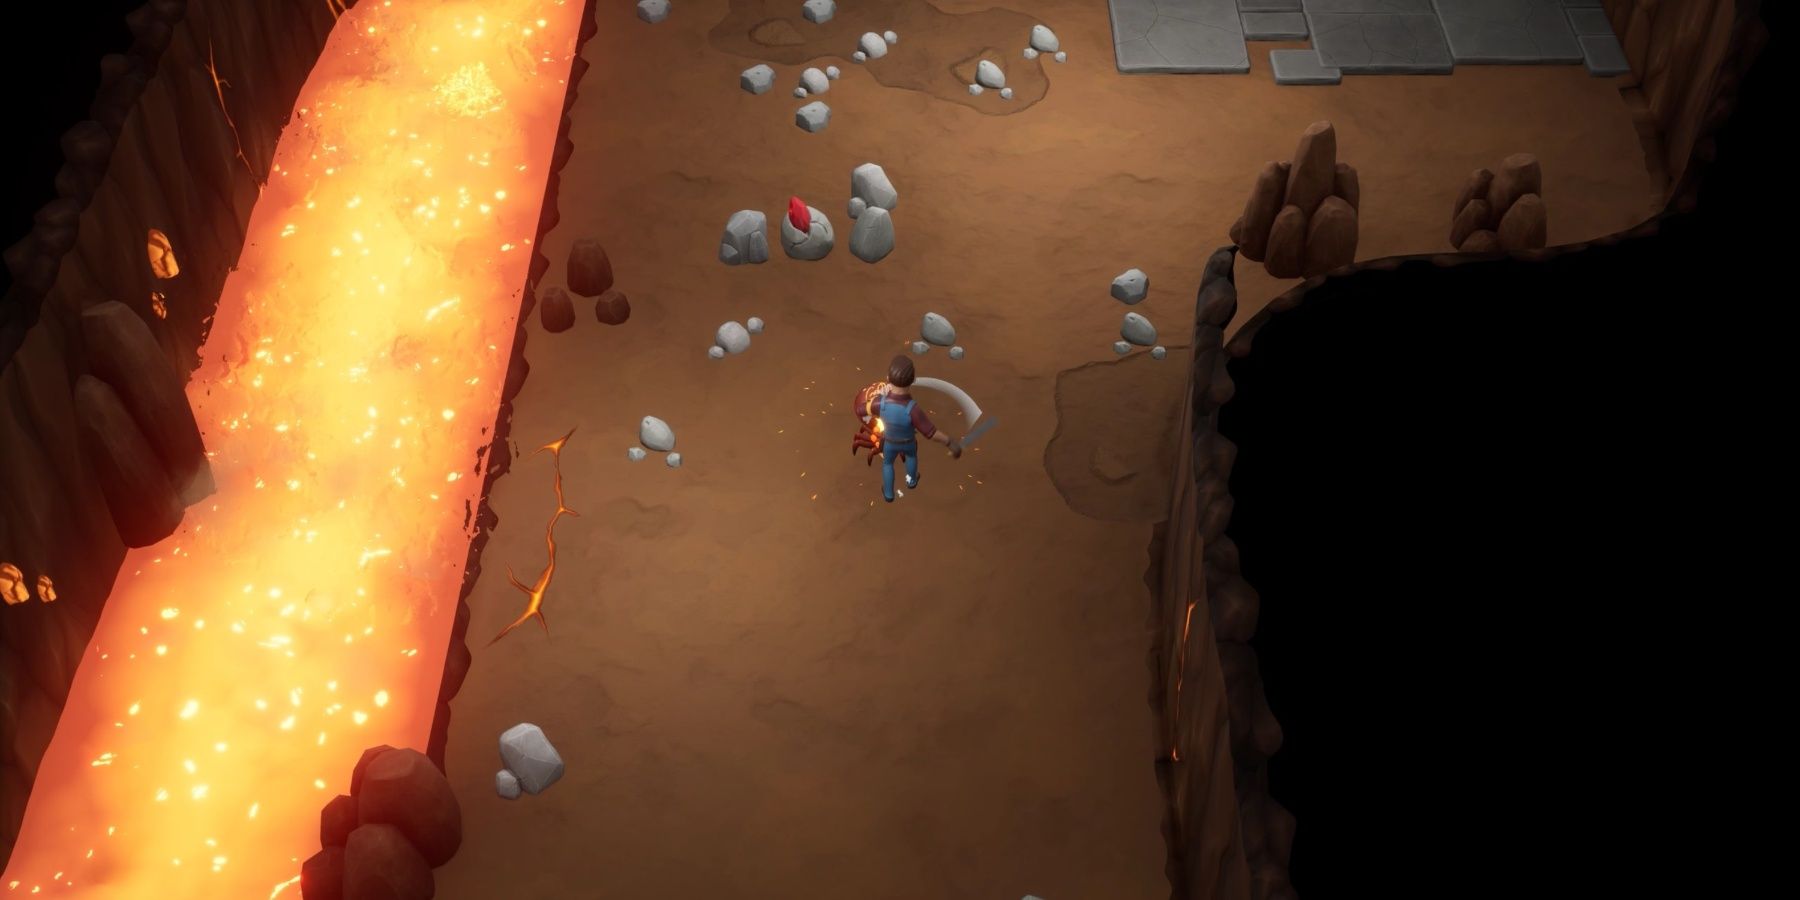 The player fighting a monster with a sword as a lava river flows next to them in the cavern